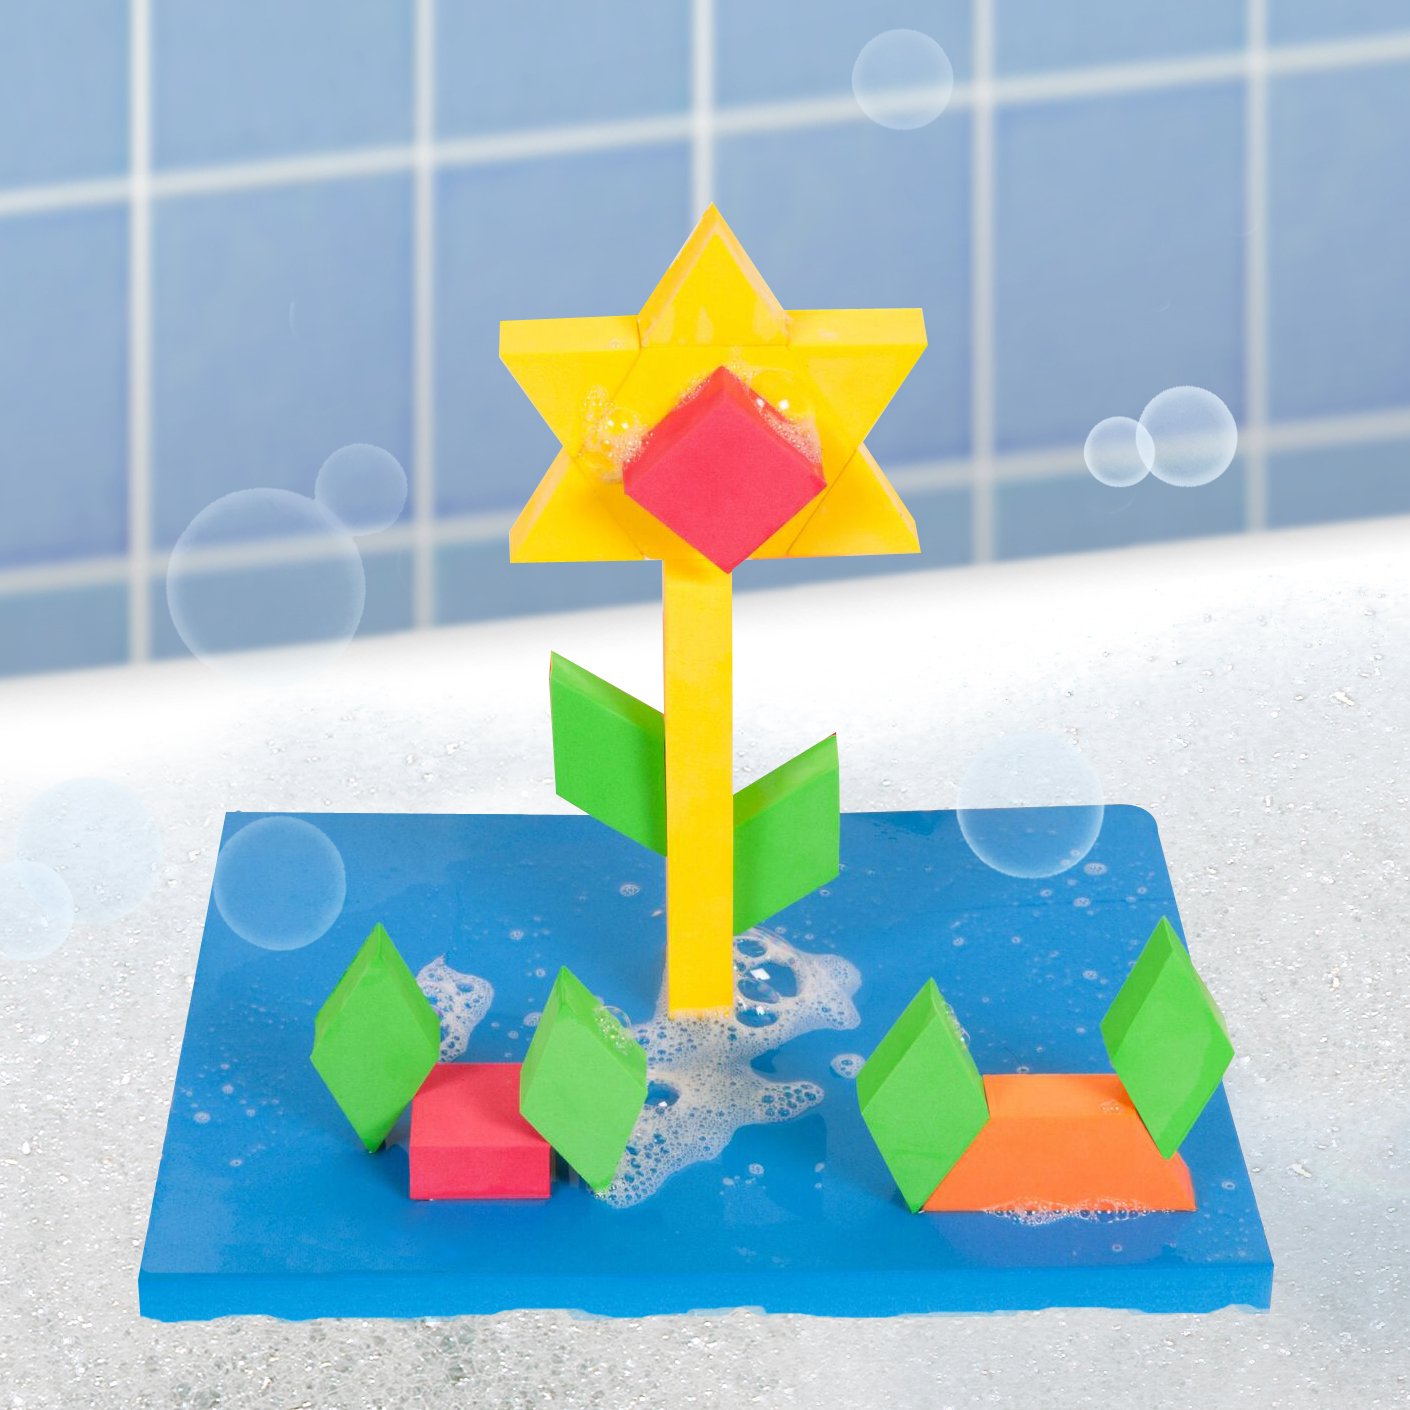 BathBlocks Stem Discovery Blocks STEM Blocks Tower Blocks Educational Bath Toy Pool Toy in Science Museums and Childrens Museums nationwide.